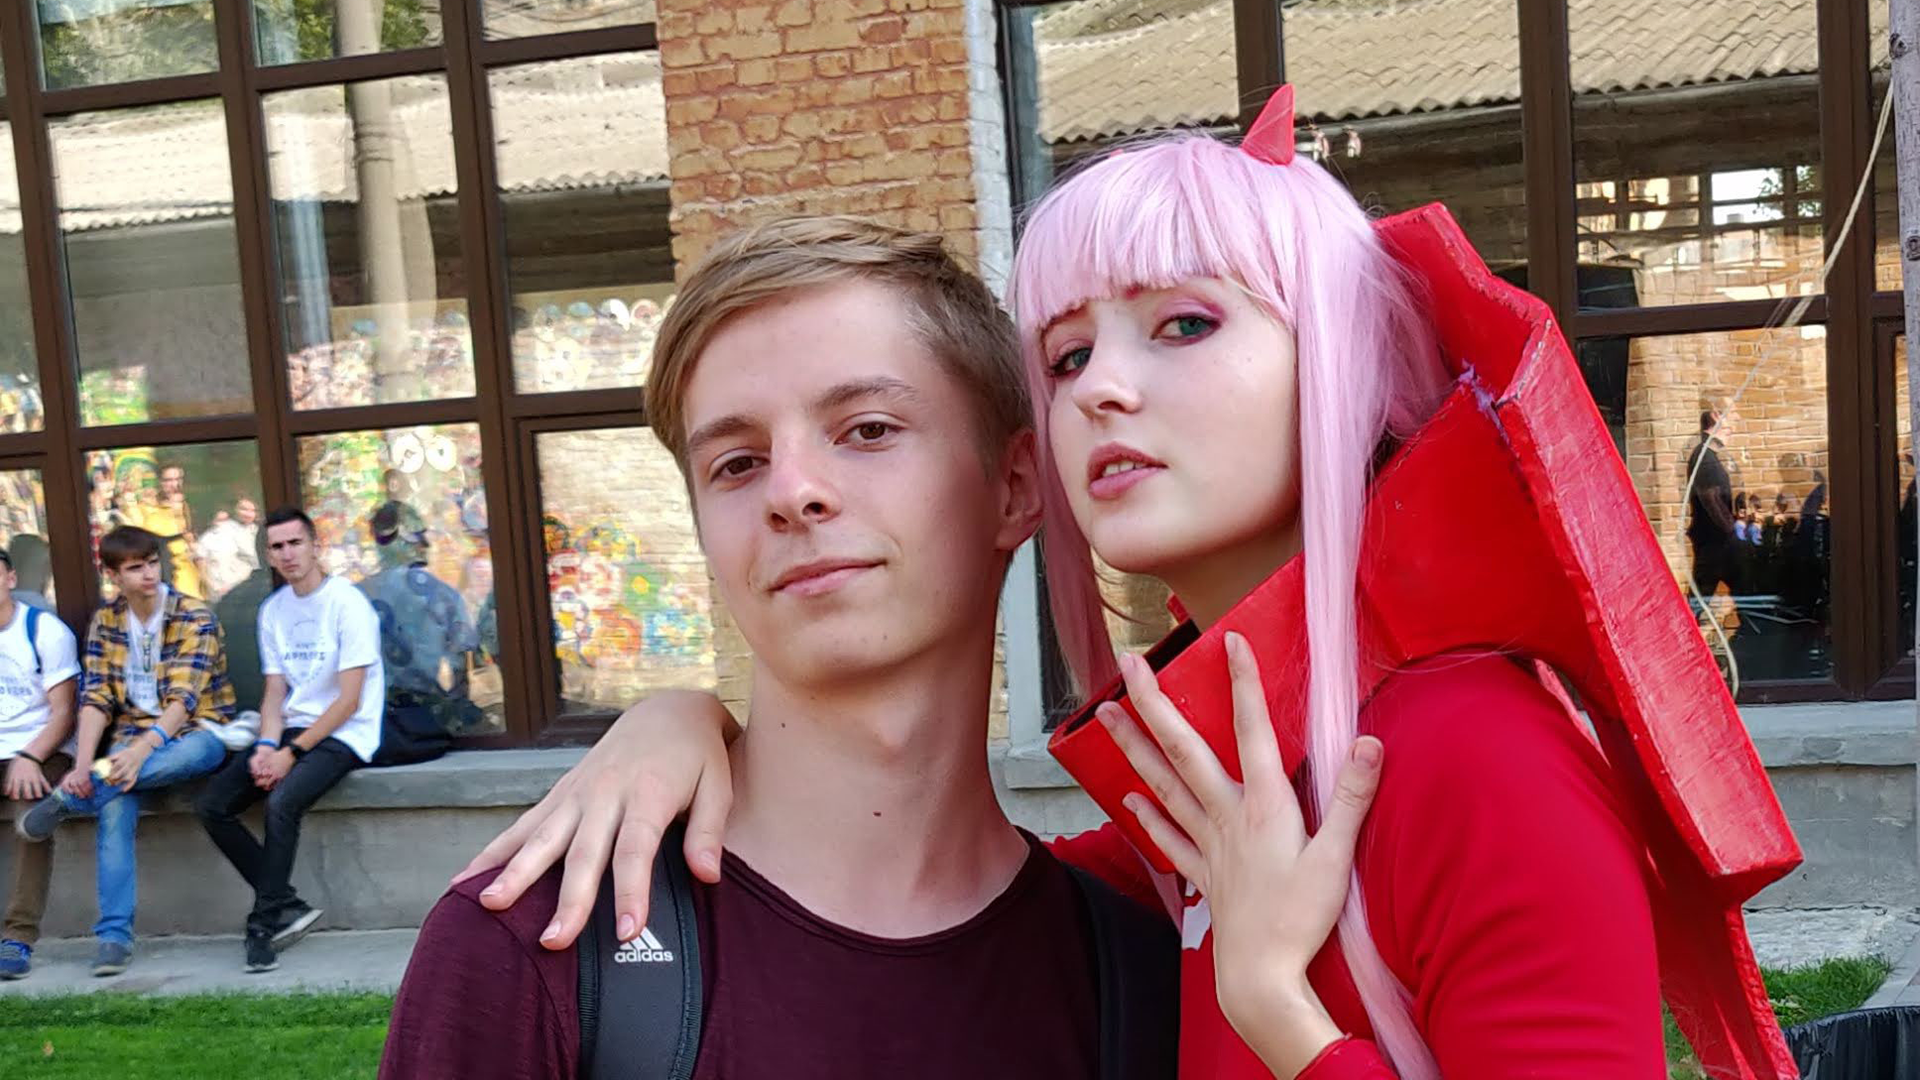 Nikita (left) and and unnamed cosplayer (right) at Comic-Con 2018 in Kyiv.